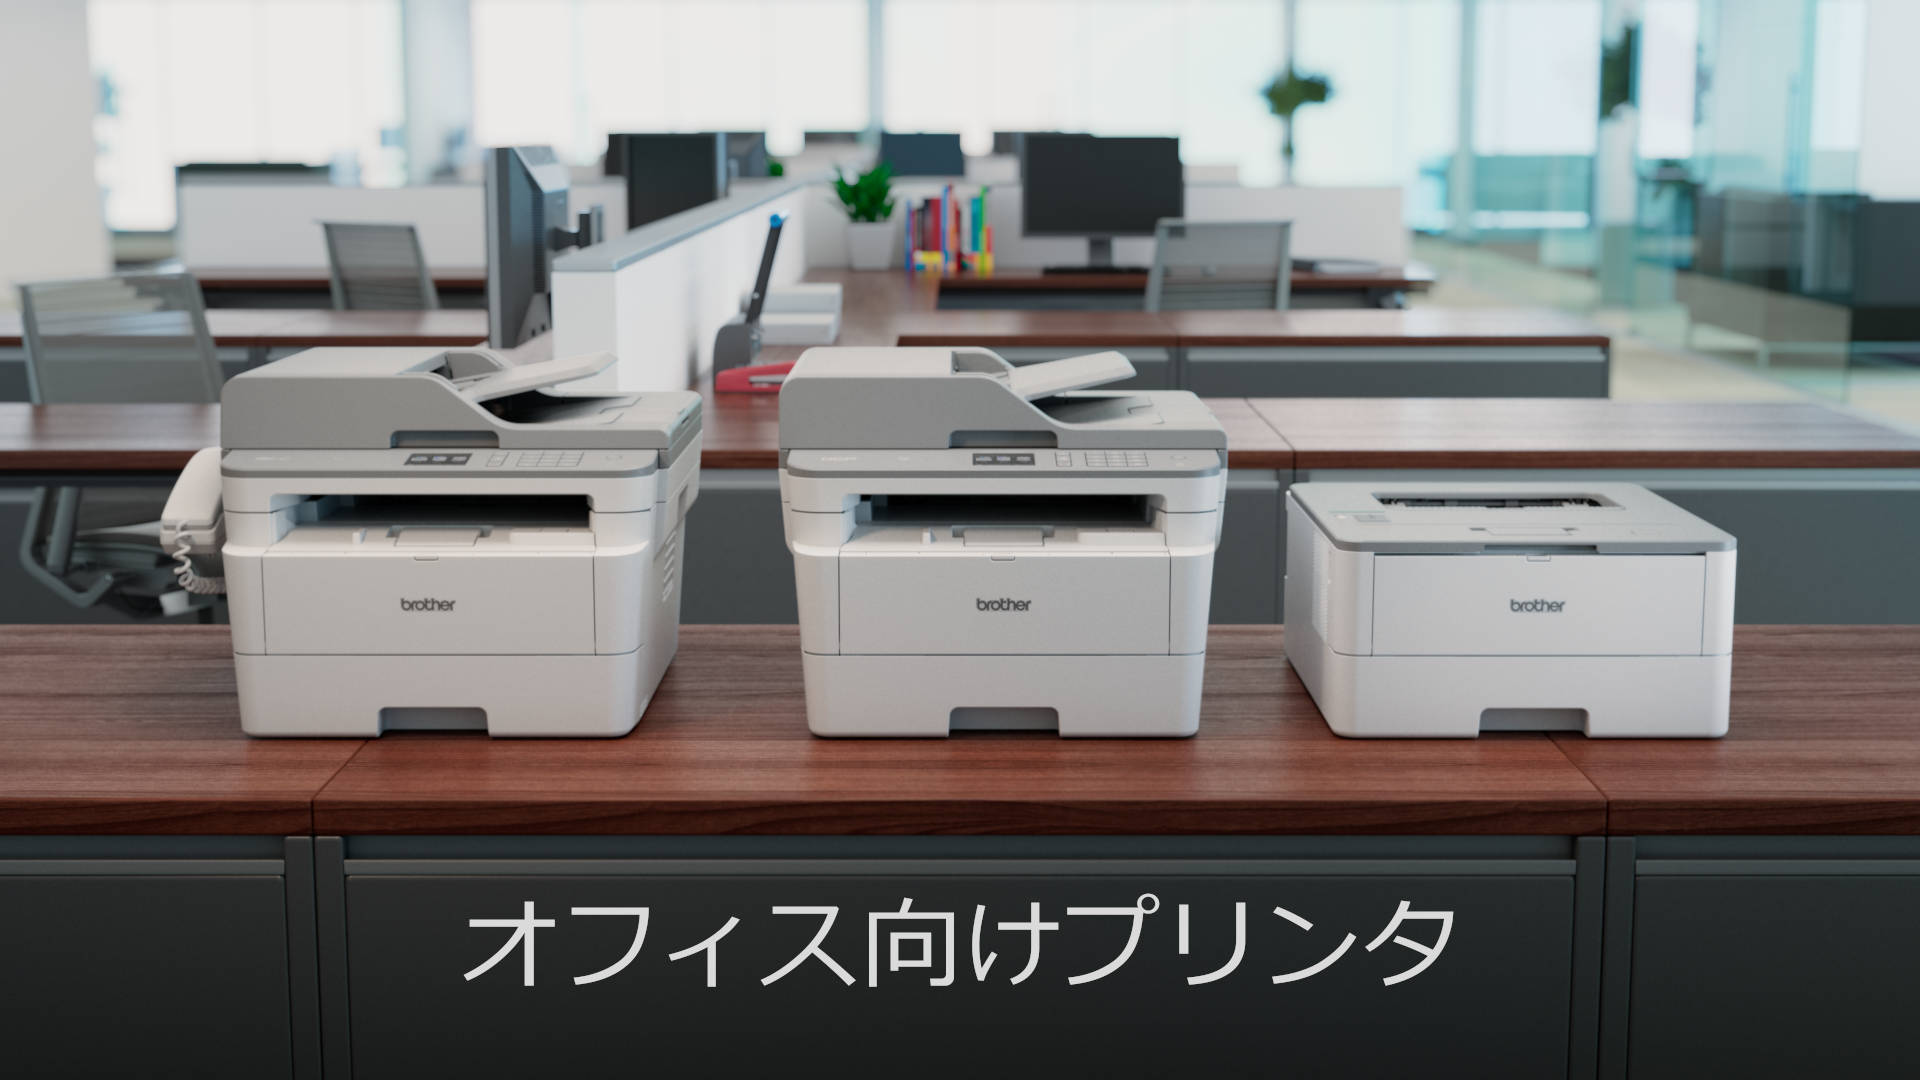 Brother printer series in an office regionalized for japan.